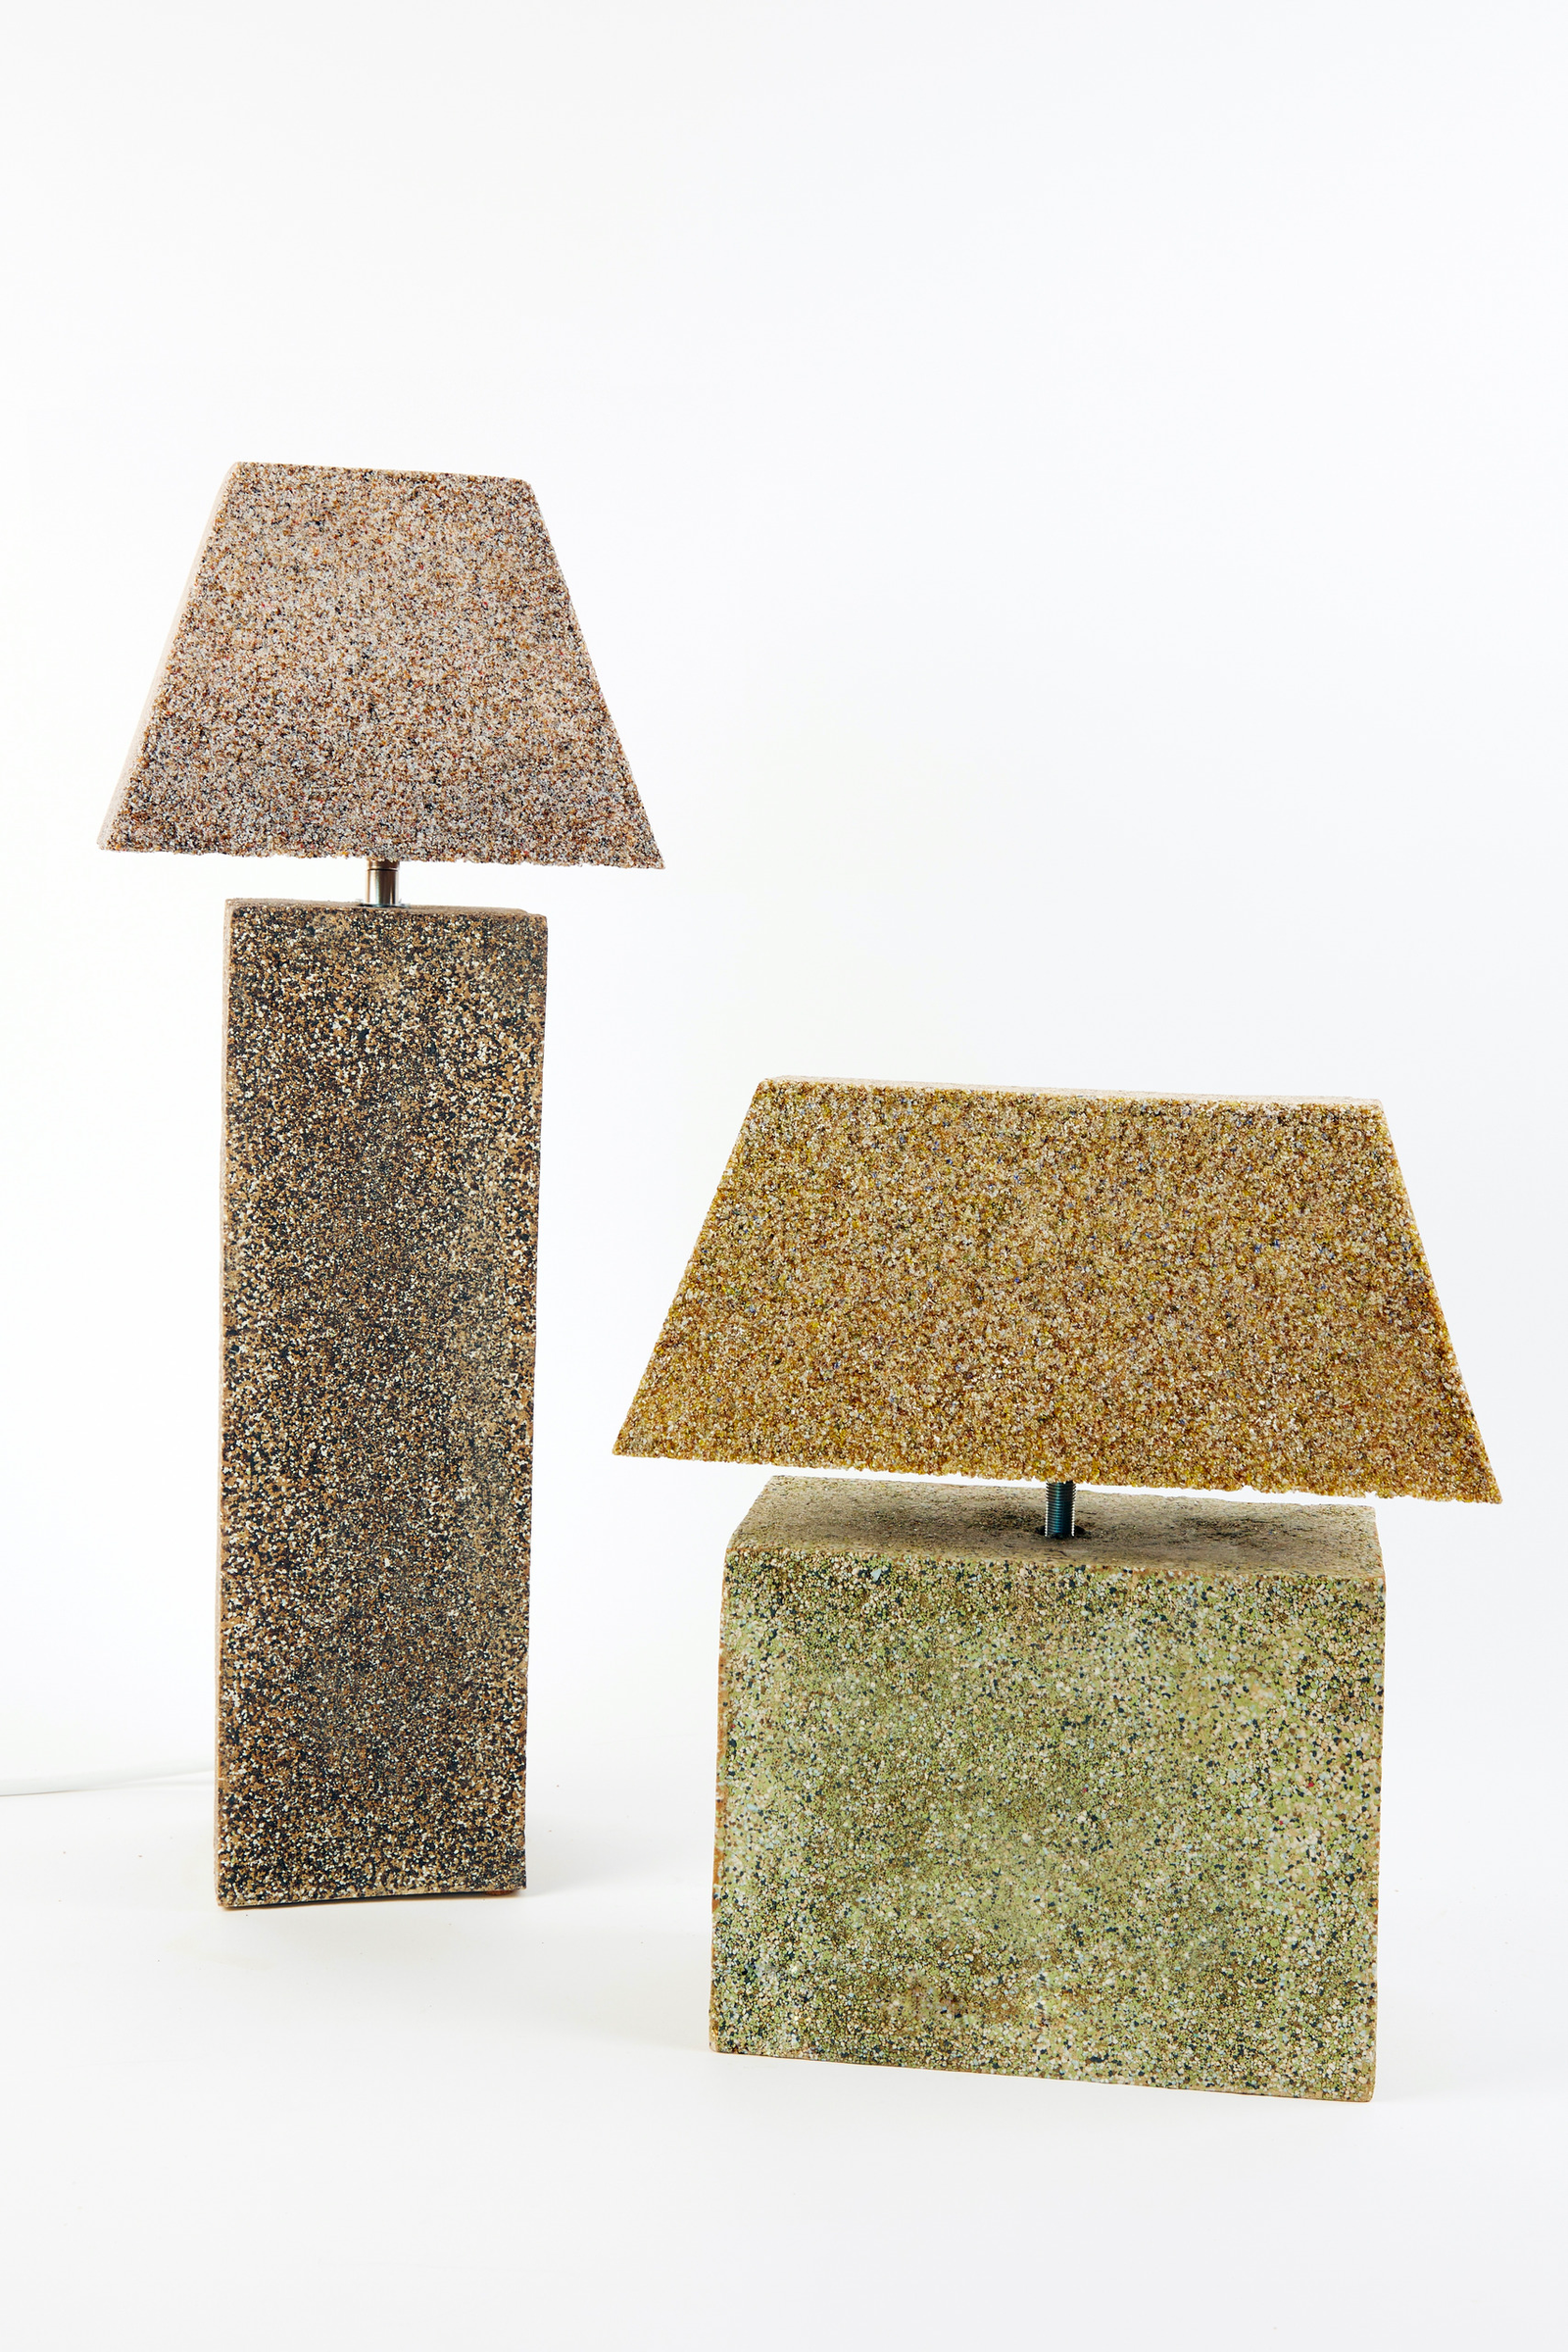 glass frit lamps